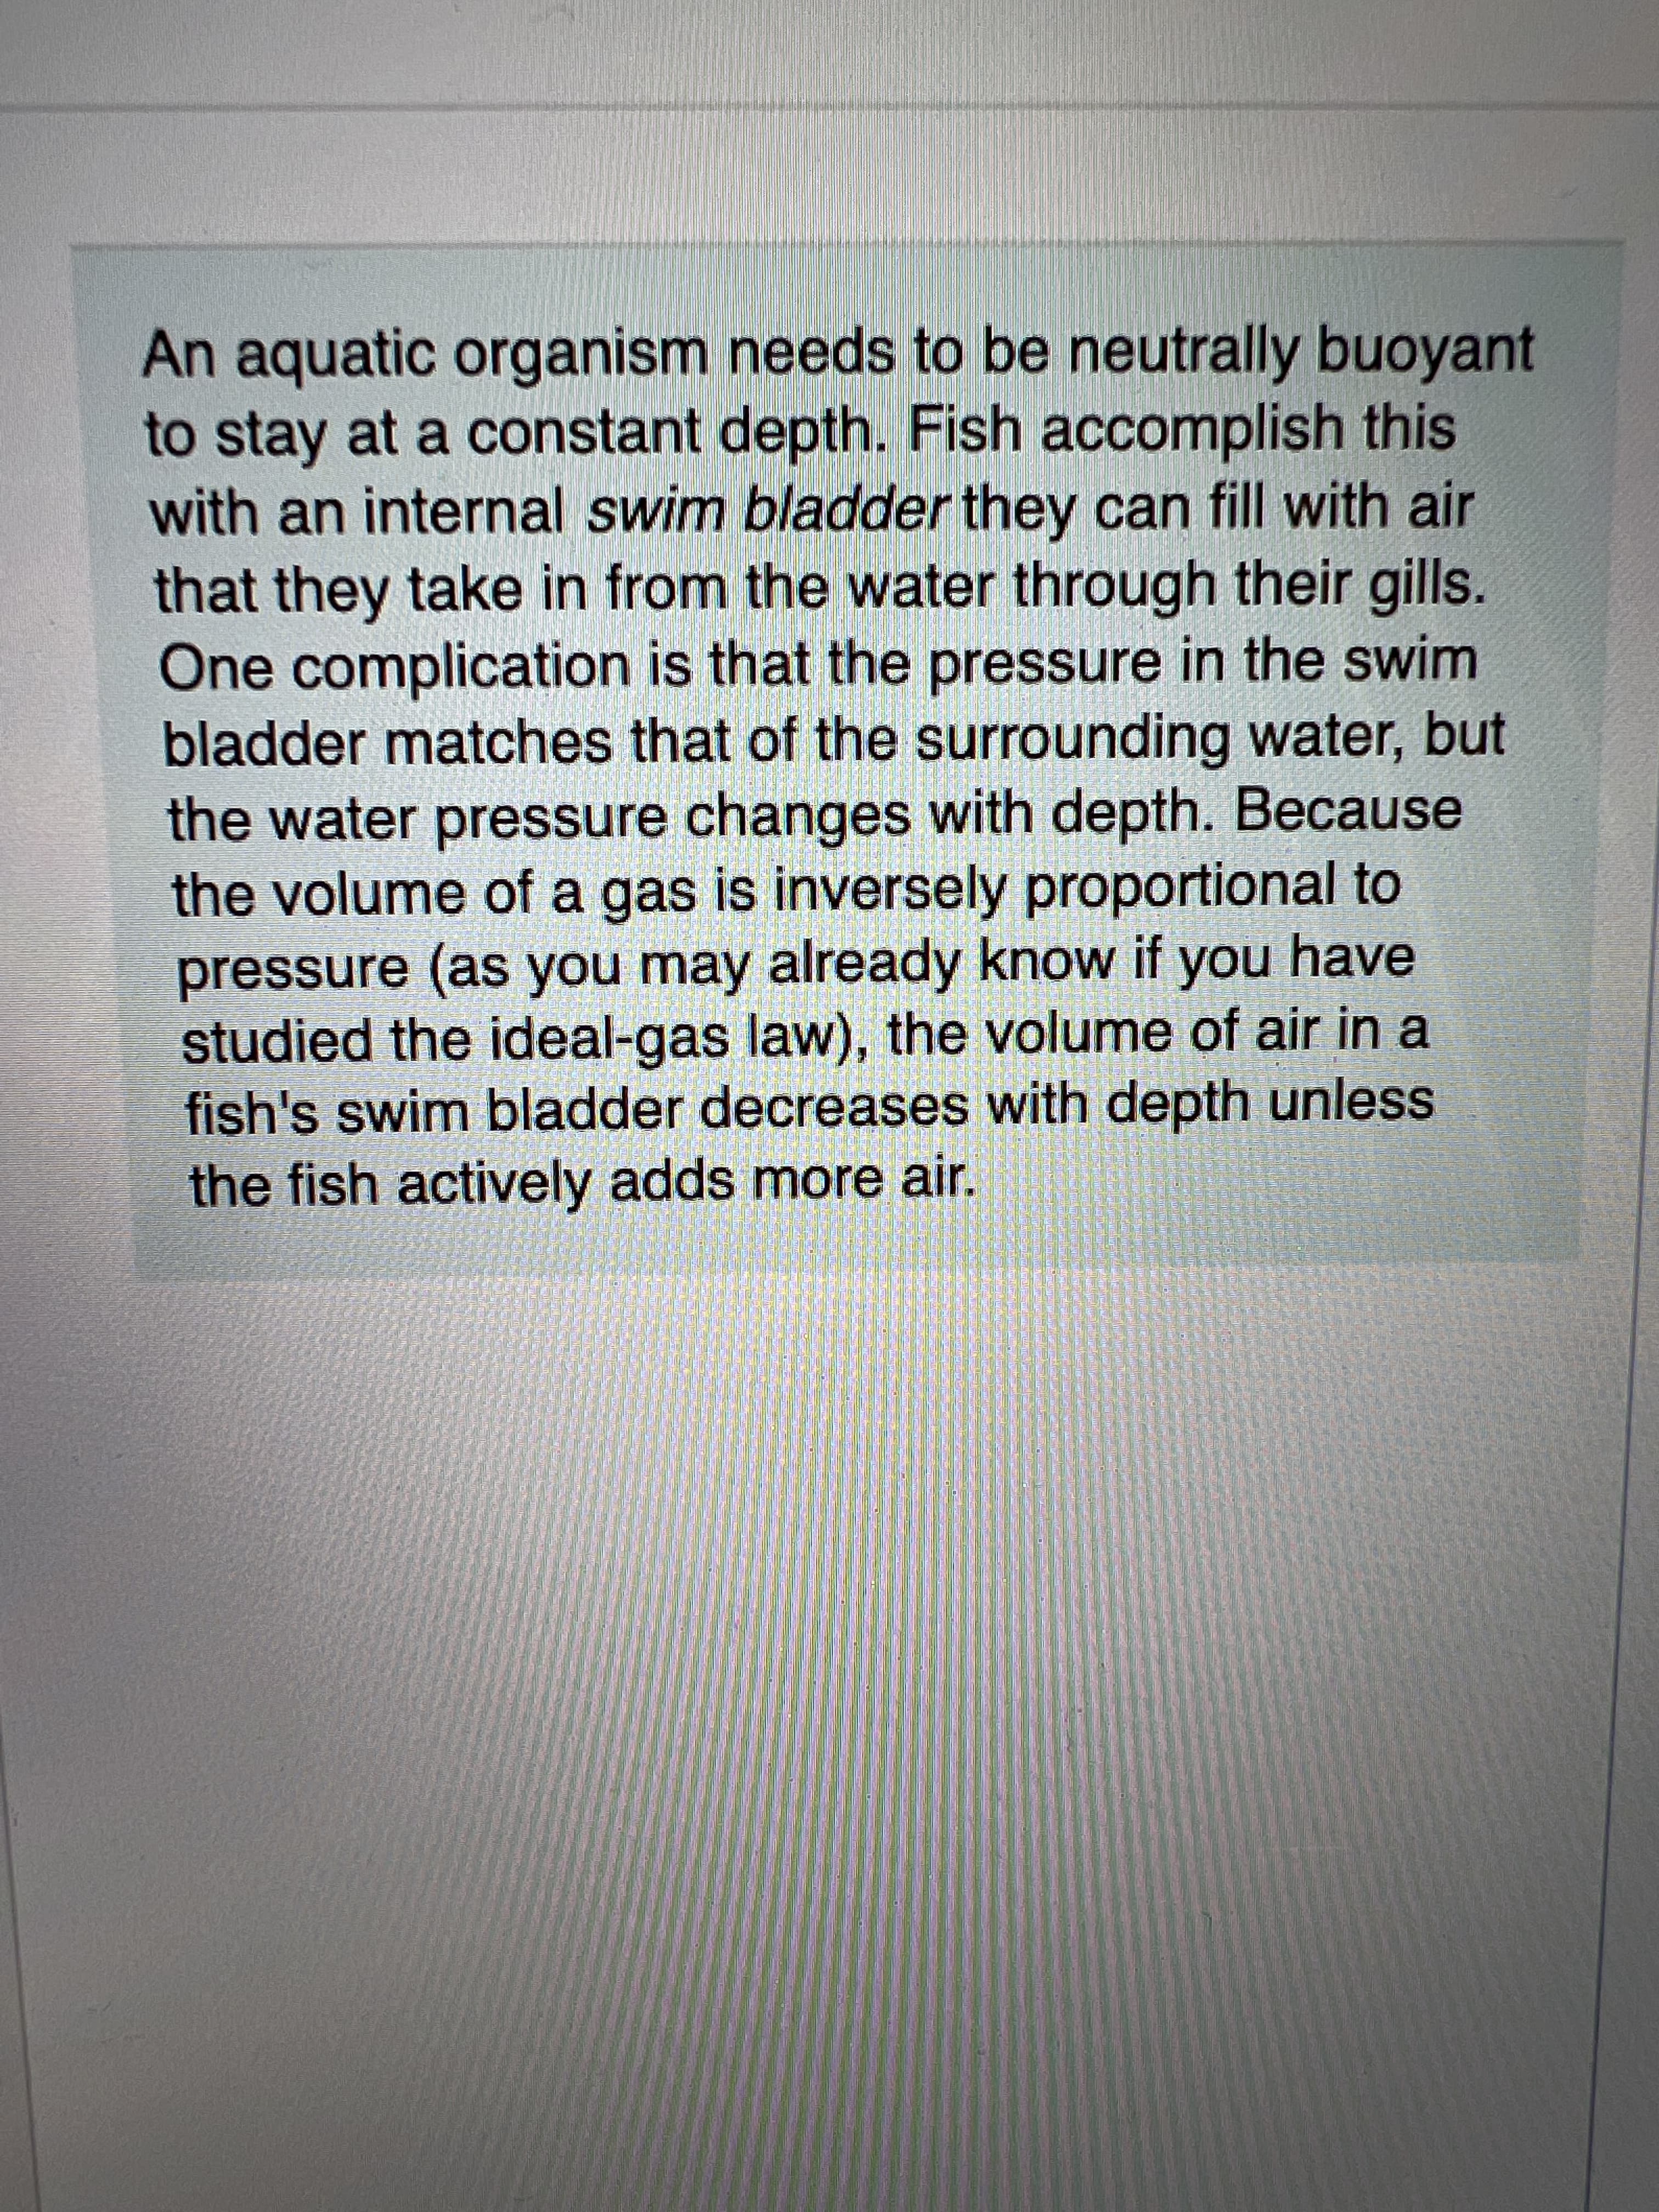 An aquatic organism needs to be neutrally buoyant
to stay at a constant depth. Fish accomplish this
with an internal swim bladder they can fill with air
that they take in from the water through their gills.
One complication is that the pressure in the swim
bladder matches that of the surrounding water, but
the water pressure changes with depth. Because
the volume of a gas is inversely proportional to
pressure (as you may already know if you have
studied the ideal-gas law), the volume of air in a
fish's swim bladder decreases with depth unless
the fish actively adds more air.
